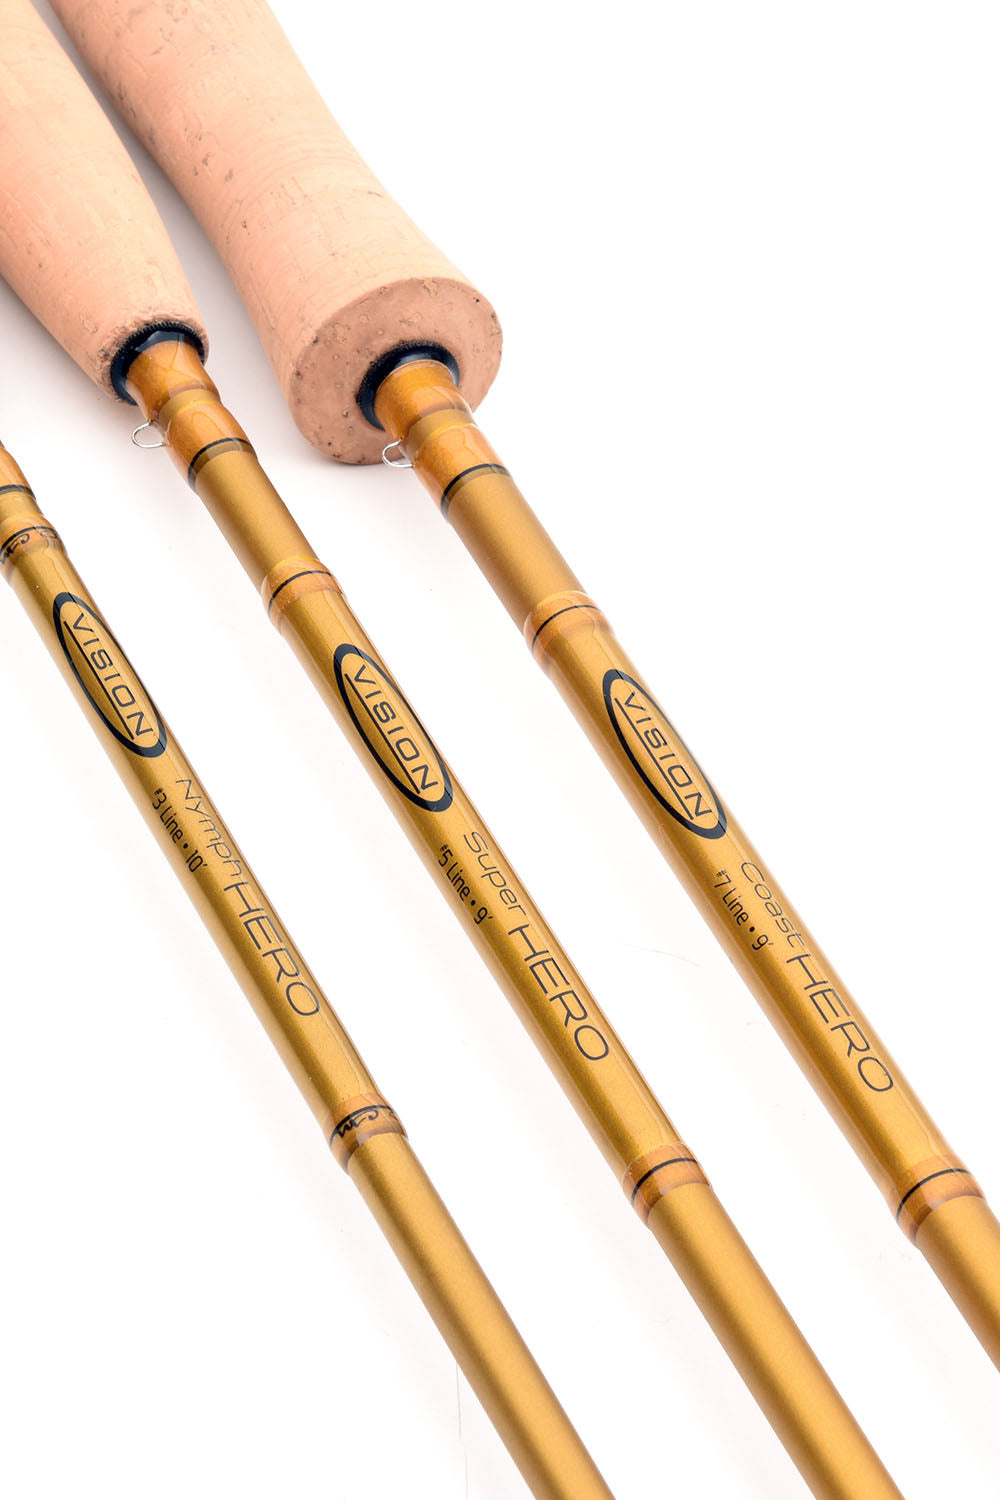 Vision Hero (Nymph) Fly Rod 10 Foot 6 #3 For Trout Fly Fishing